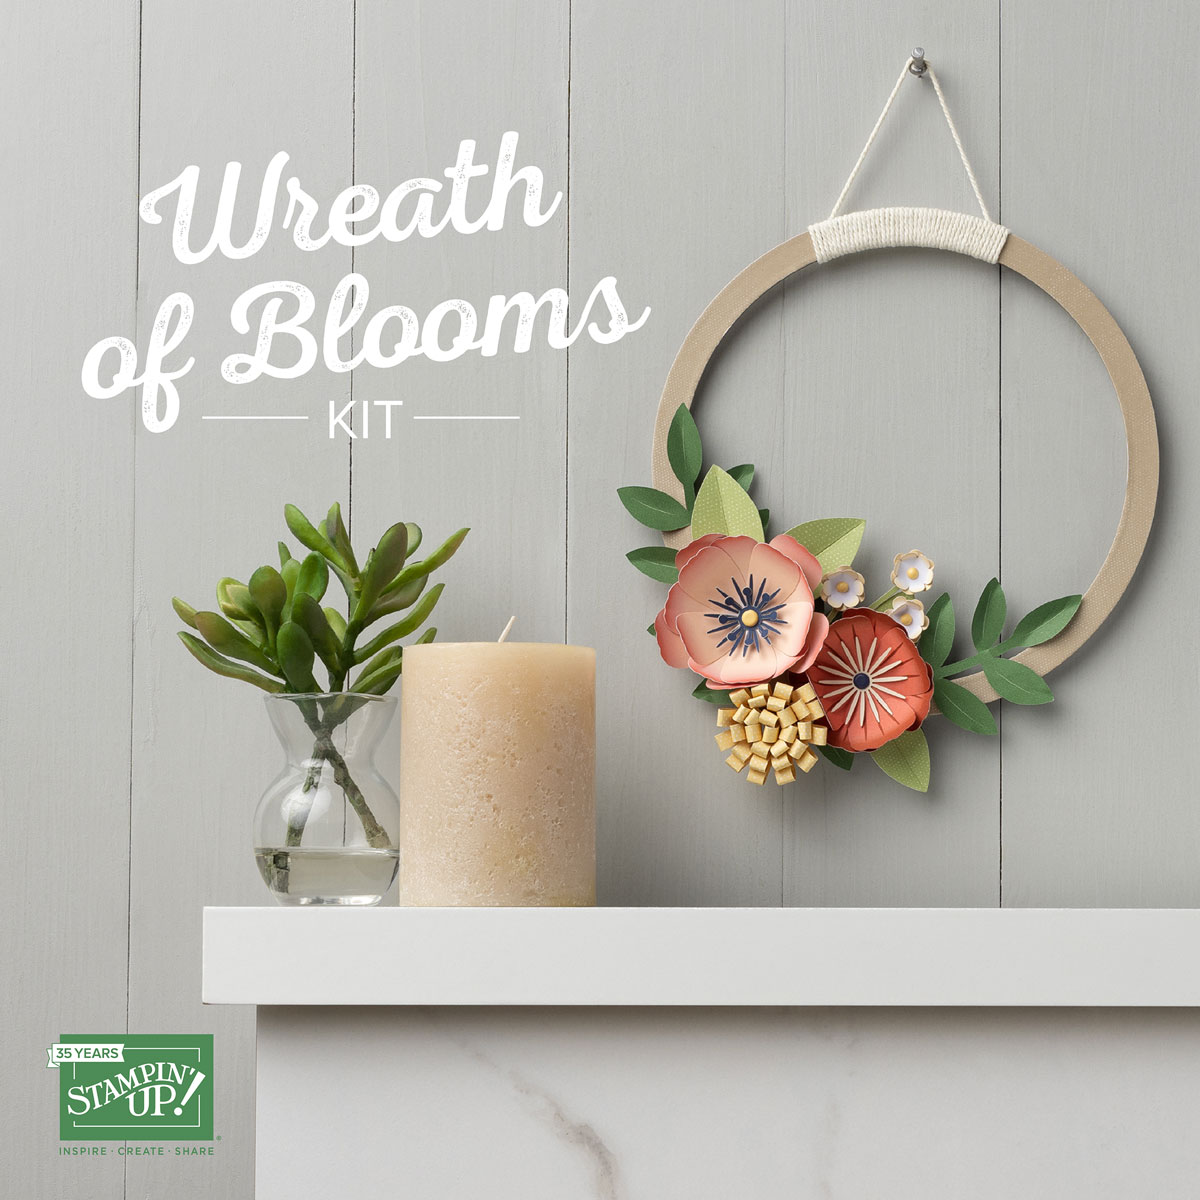 Wreaths-in-bloom-kit-share